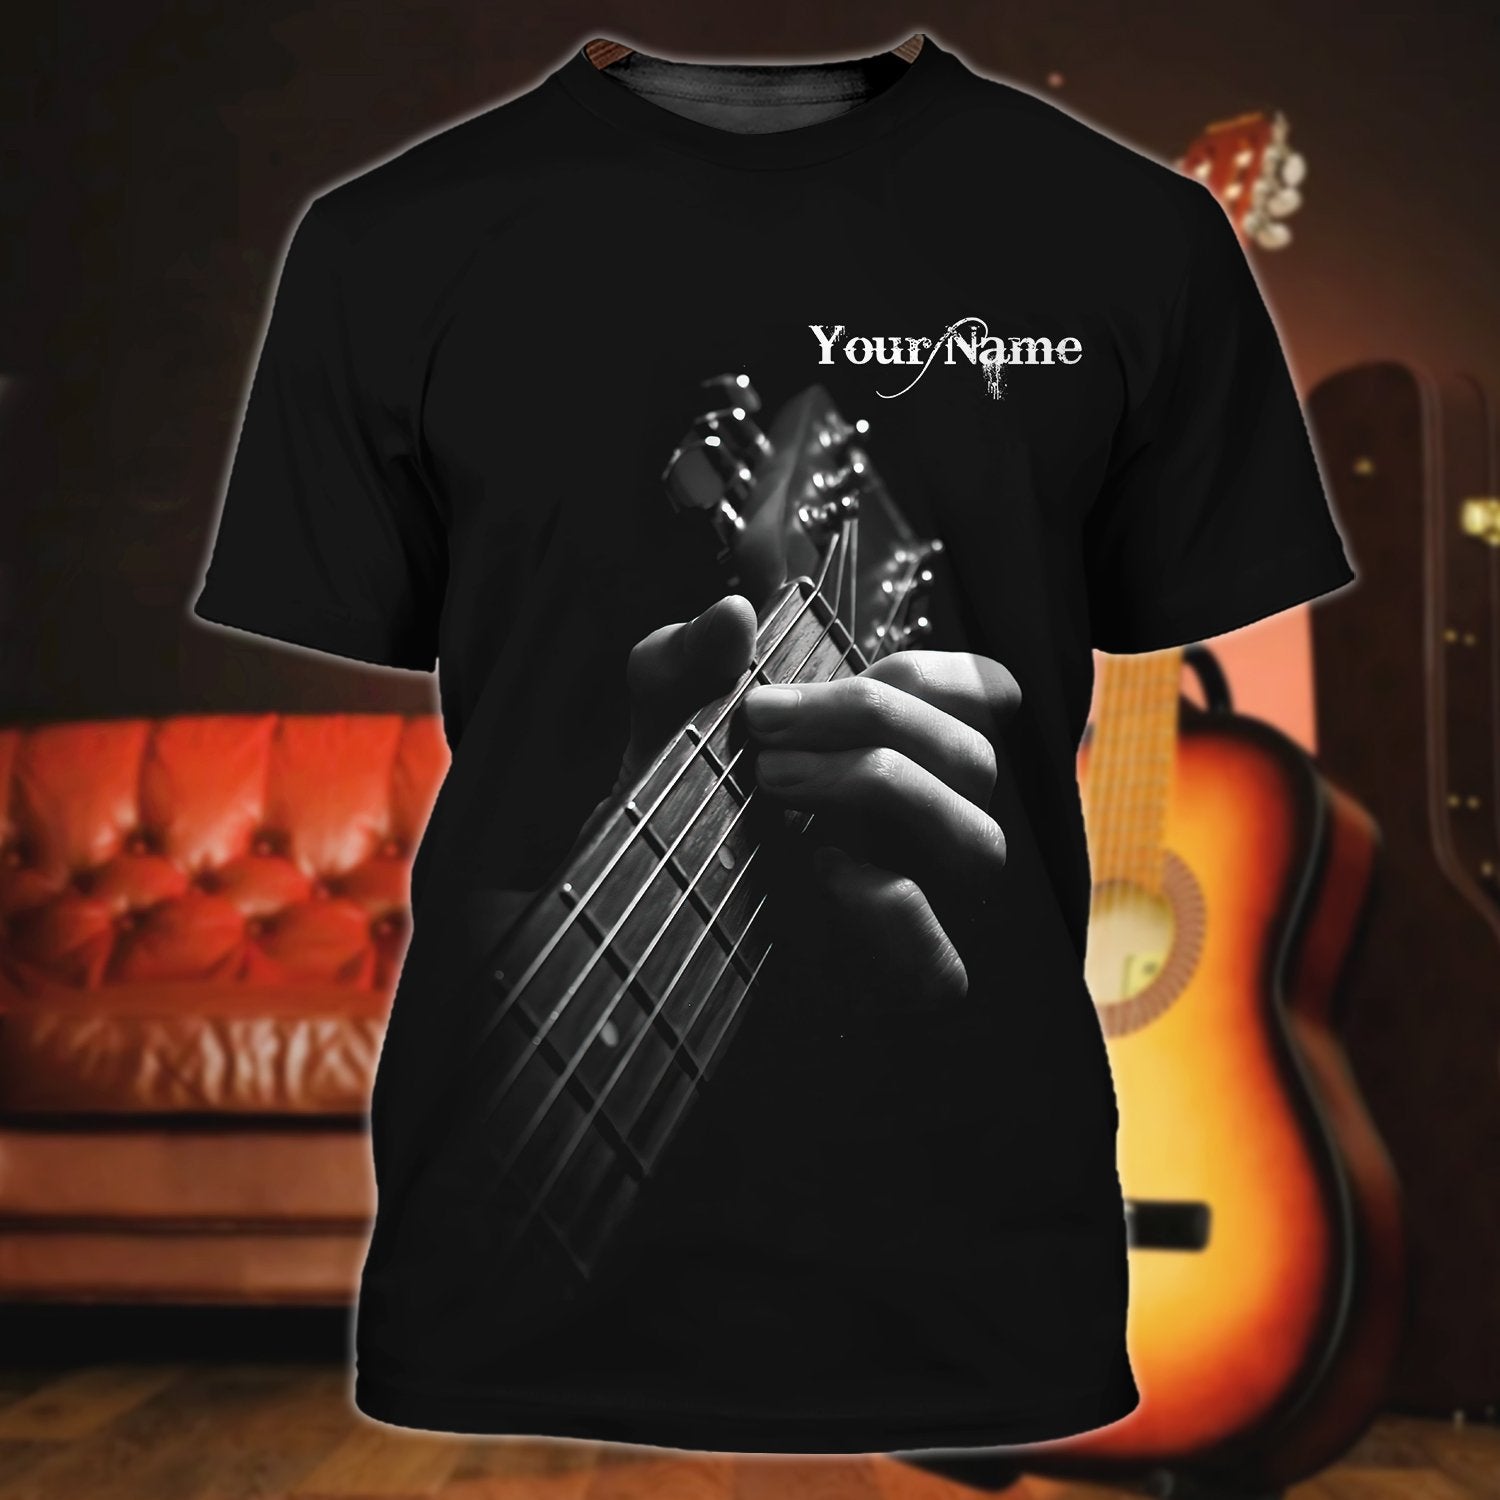 Personalized 3D Playing Guitar Shirt/ Guitar Sublimation Shirt For Music Lovers